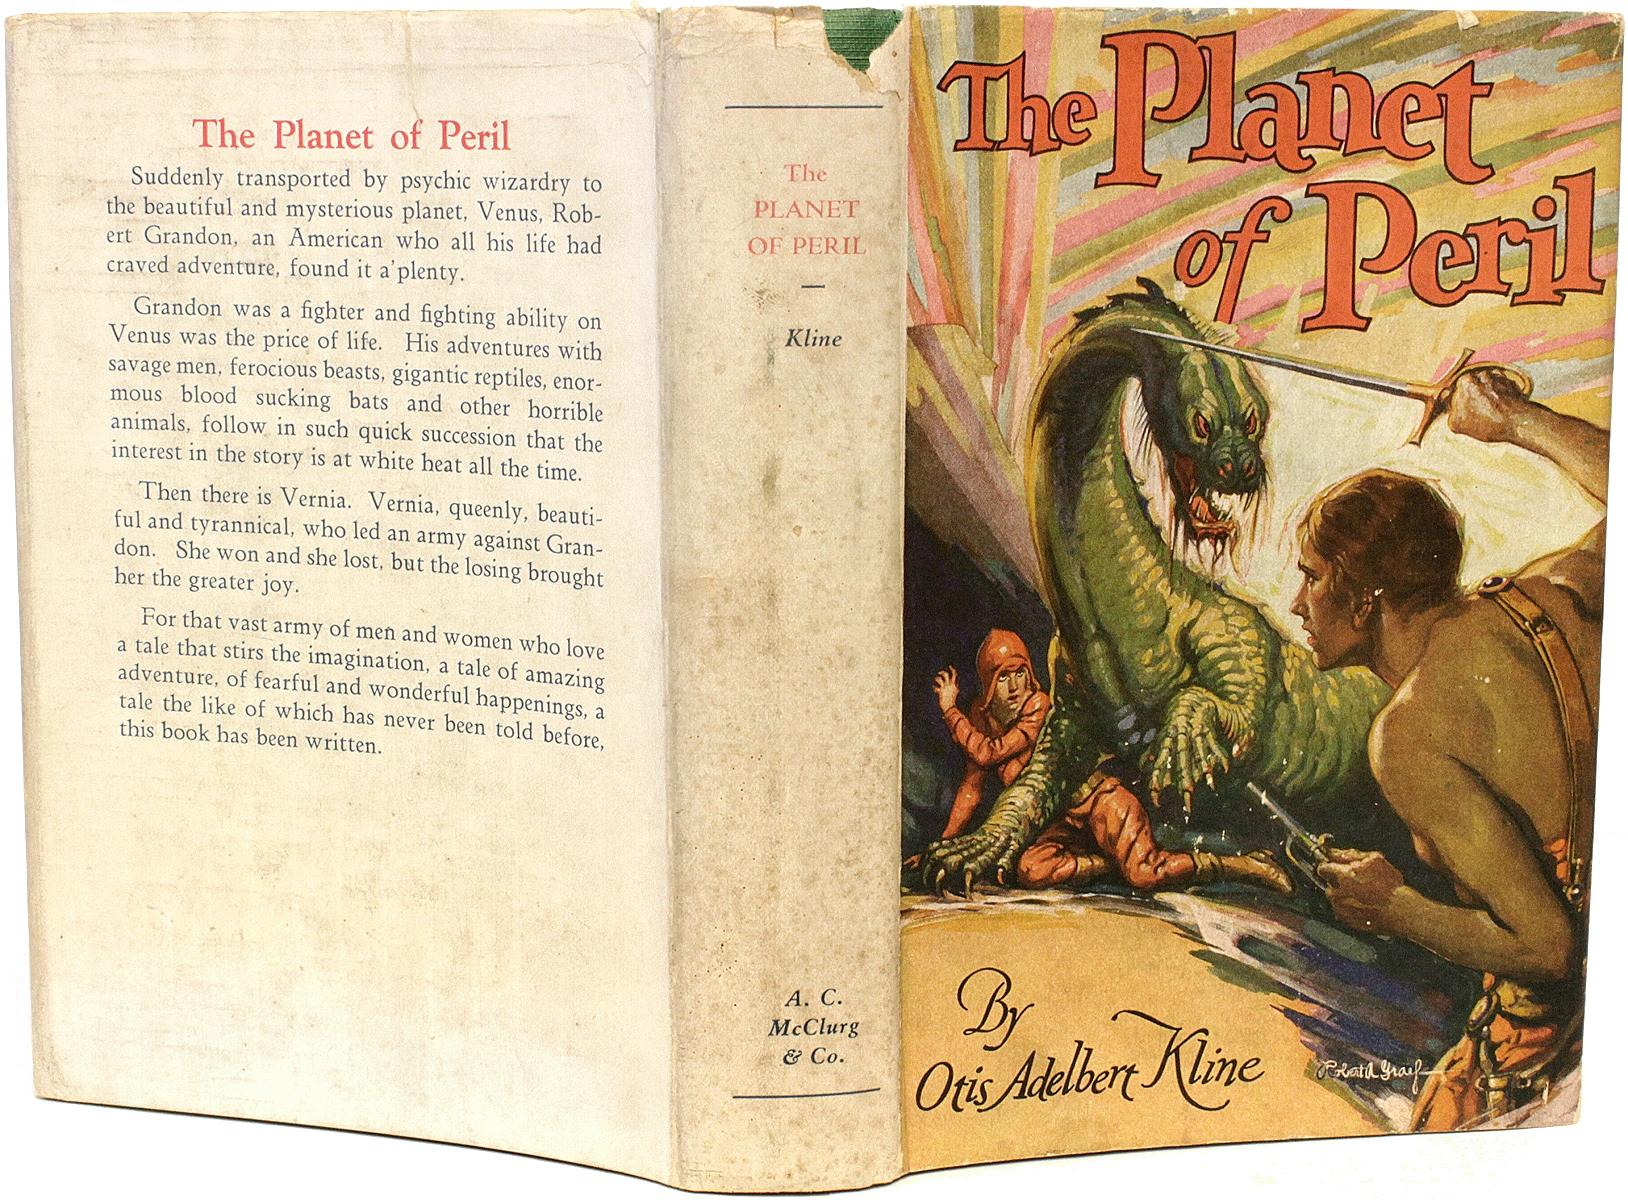 Author: Kline, Otis Adelbert. 

Title: The Planet of Peril. 

Publisher: Chicago: A. C. McClurg & Co.,1929.

Description: First Edition. 1 vol., hardbound, original brown stamped green cloth, with the DJ, jacket art by Robert A.